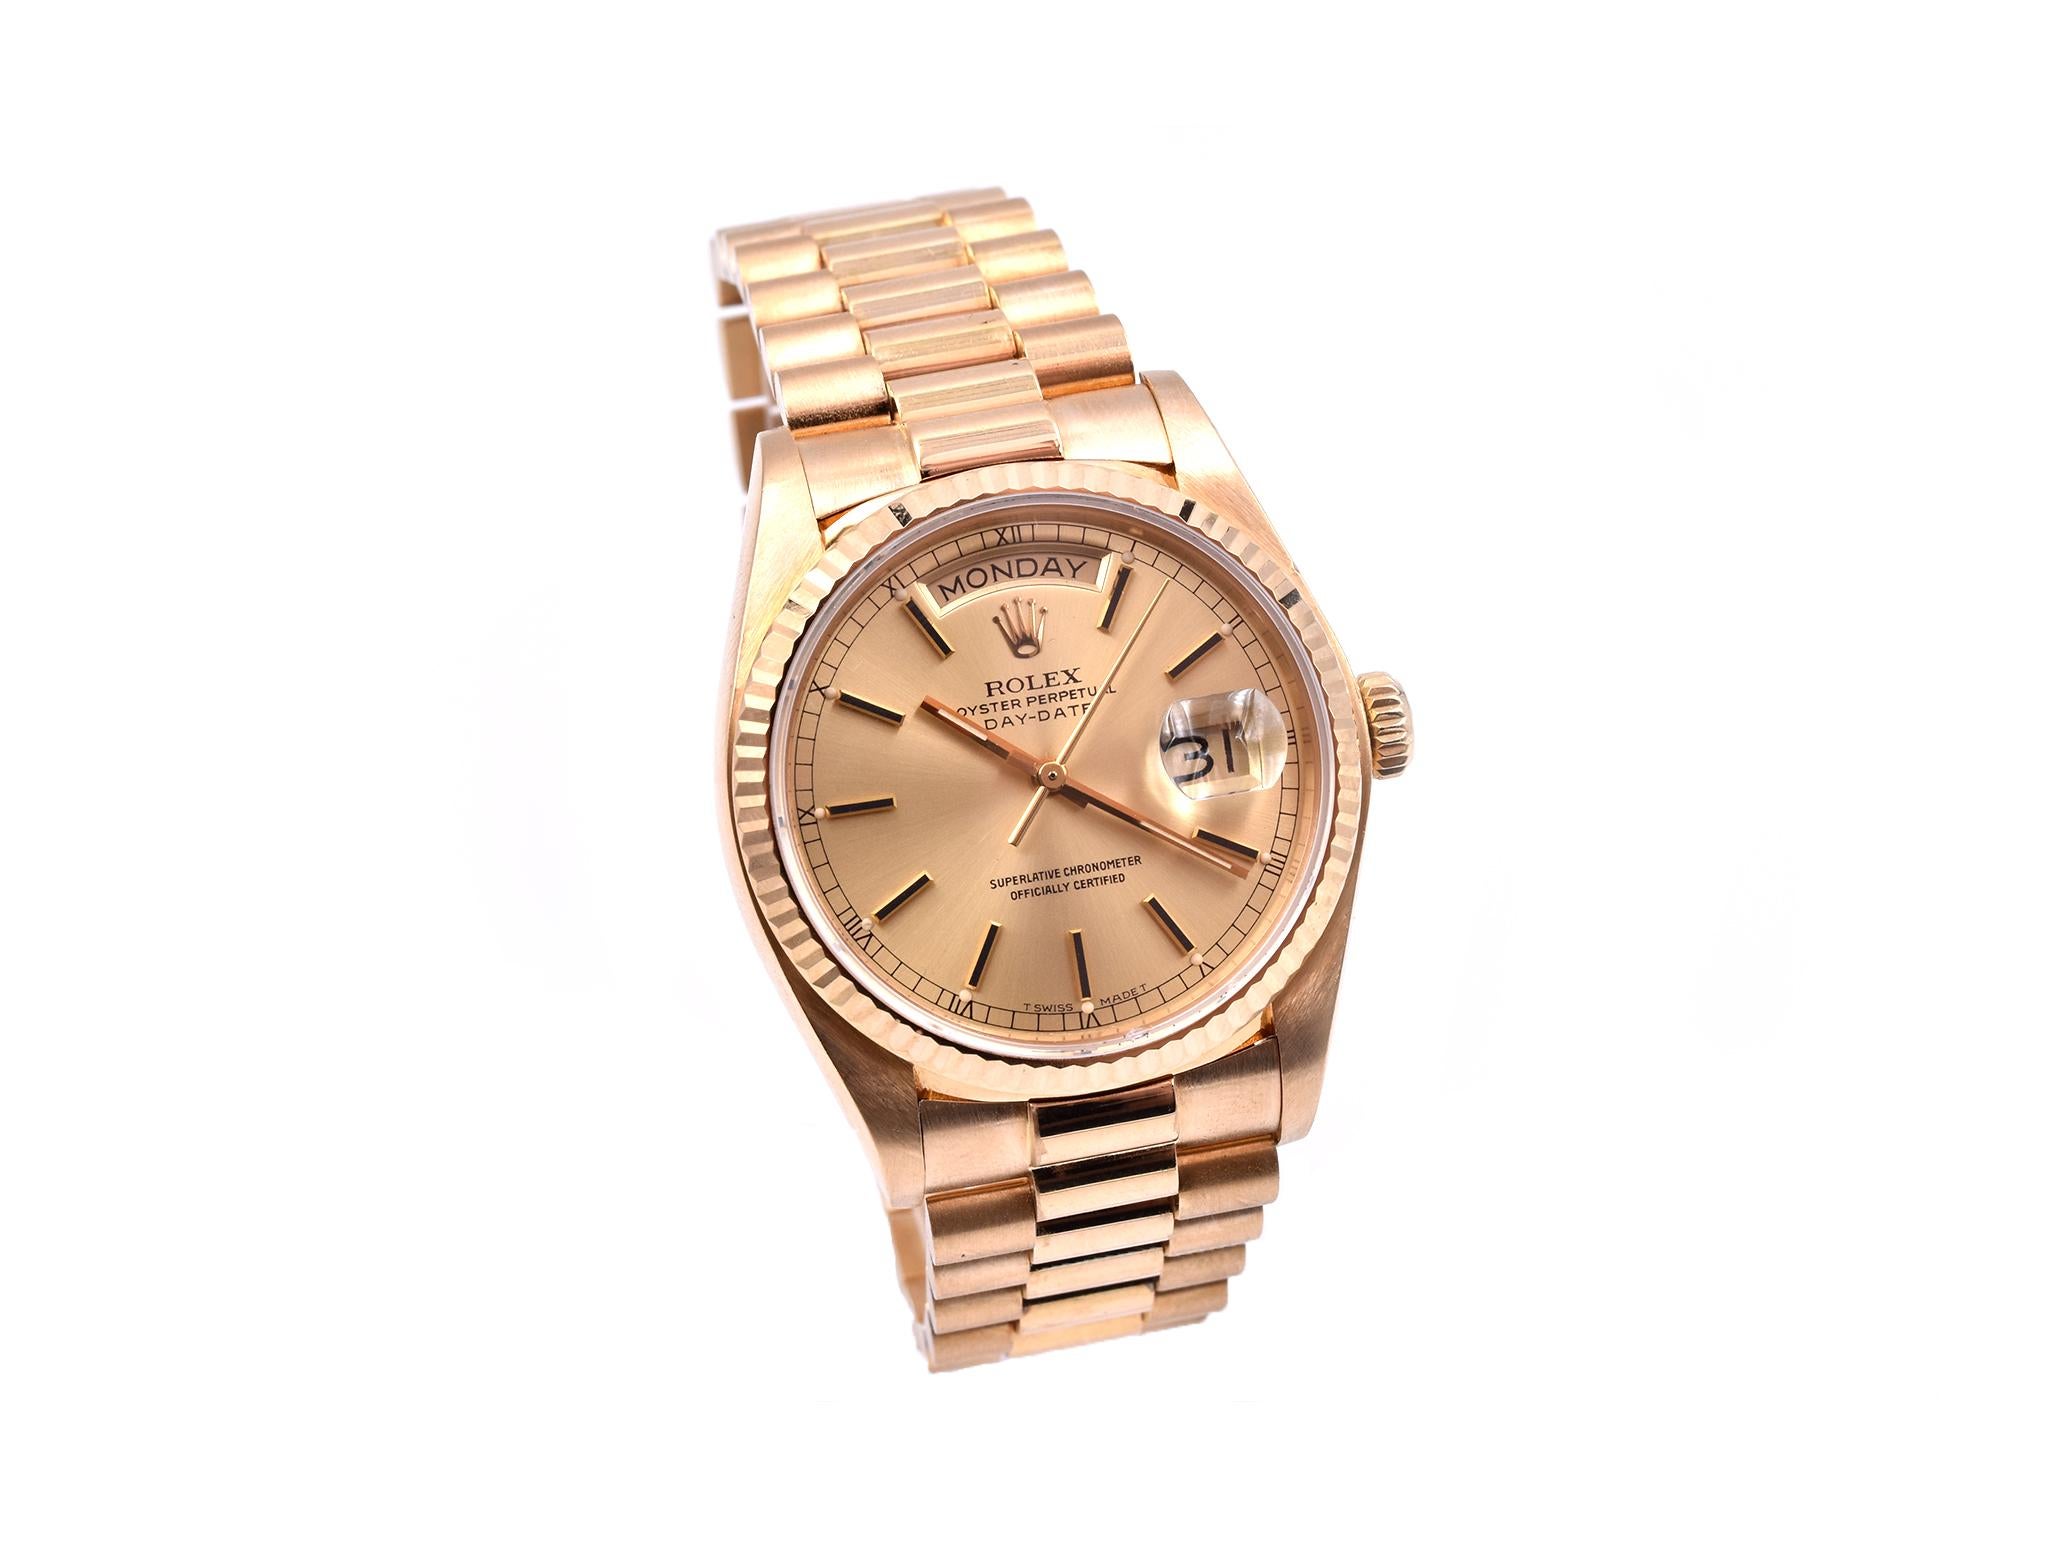 Movement: automatic
Function: hours, minutes, seconds, day, date
Case: 36mm round 18k yellow gold case with 18k yellow gold fluted bezel, sapphire protective crystal, screw-down crown, water resistant to 100 meters
Band: 18k yellow gold presidential